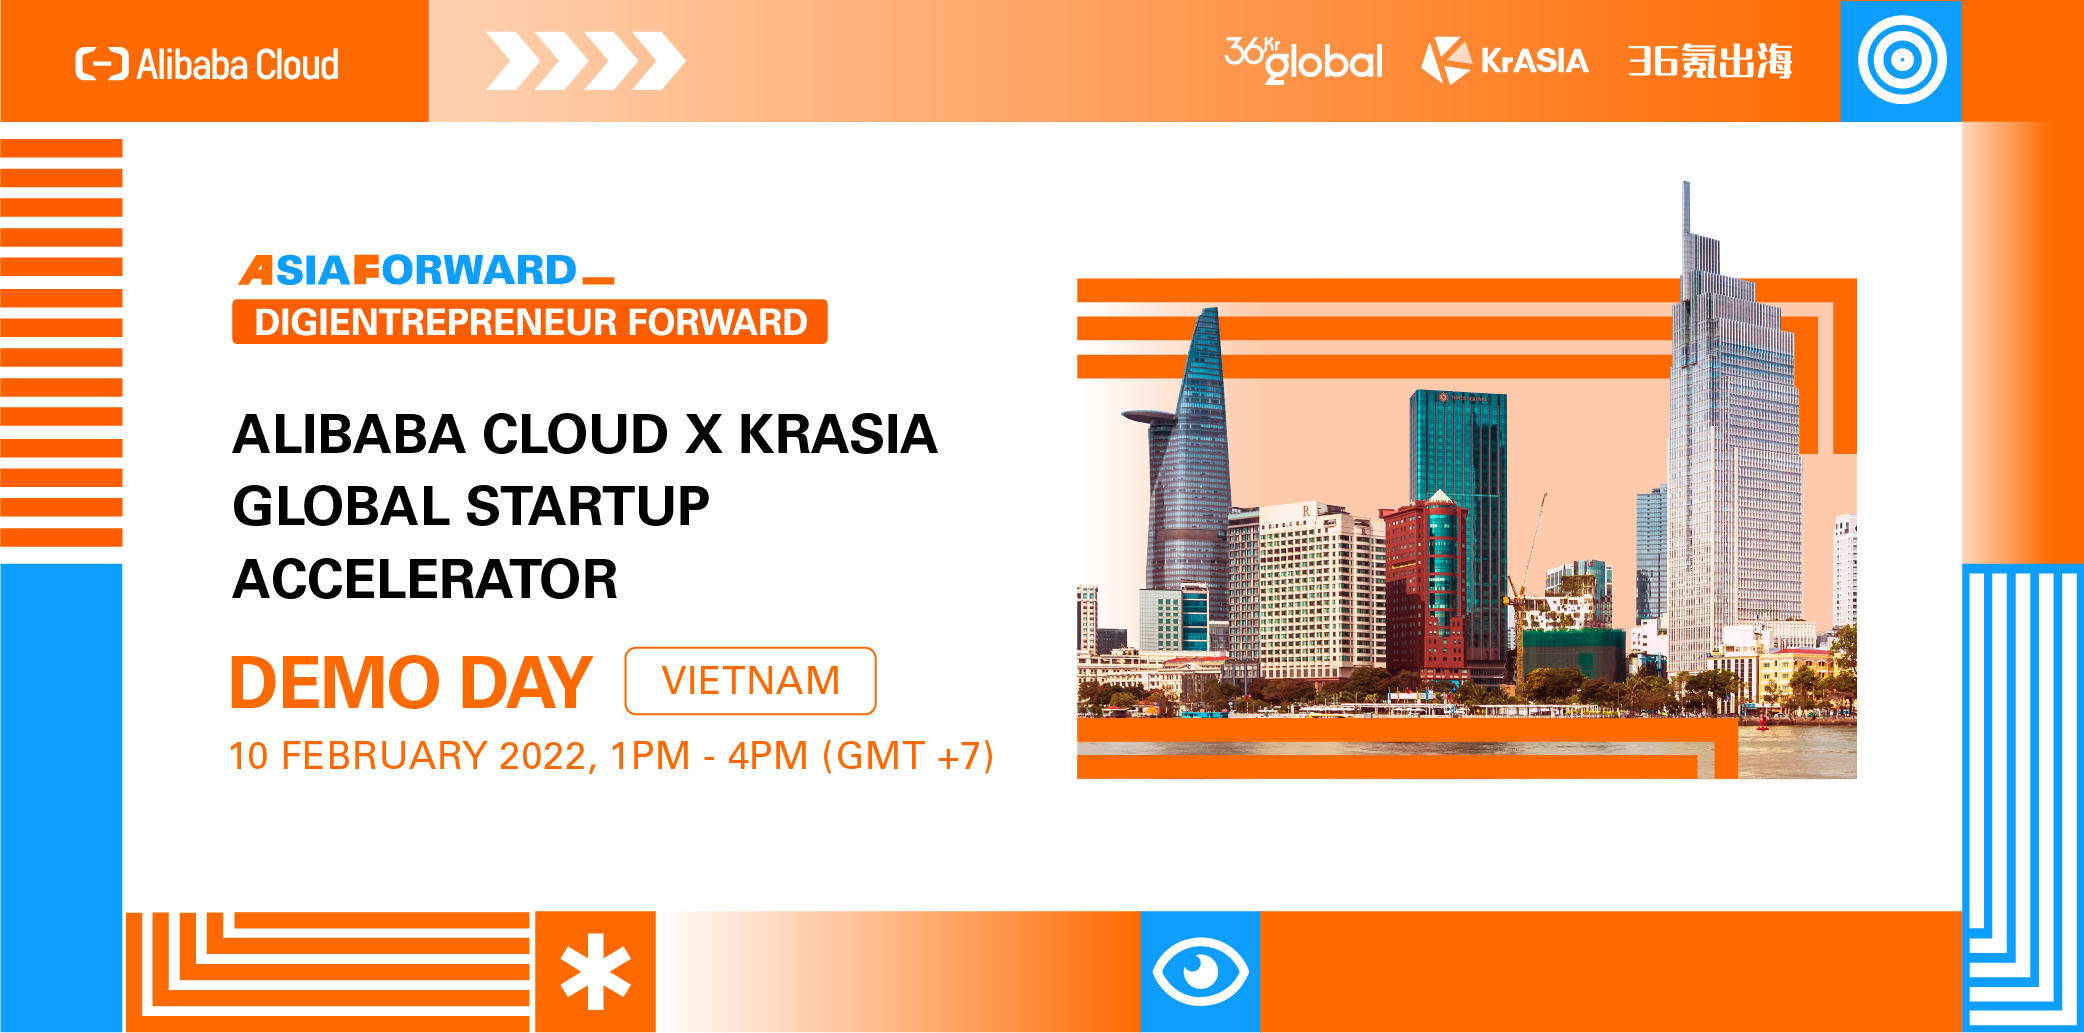 Registration opens for the Alibaba Cloud x KrASIA Global Startup Accelerator Vietnam Demo Day